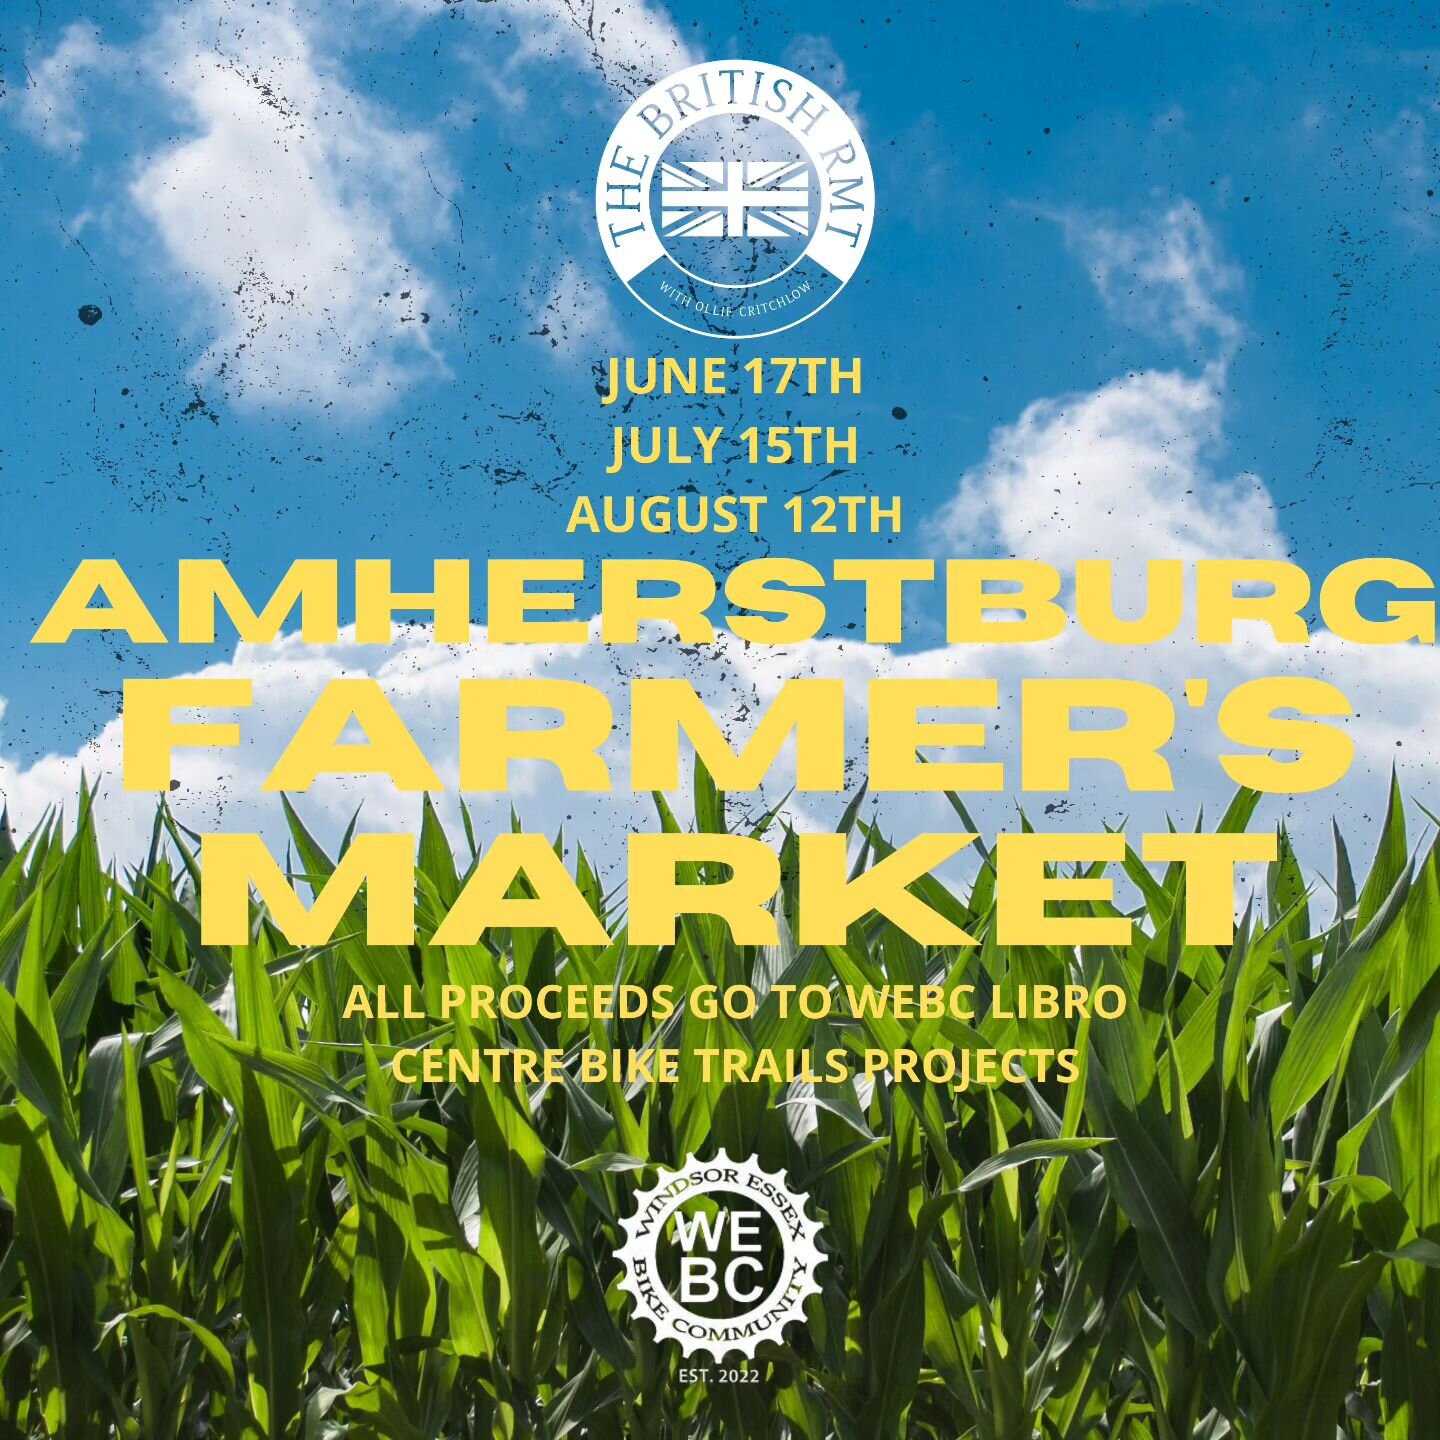 As promised 🙏 Returning in June, July and August @amherstburgmarket hosted at the lovely, welcoming, beautiful land of GL Heritage Brewing Company 🍻

$20 = 15 minute Chair Massage and all proceeds go to our friends @webcride who are building more L